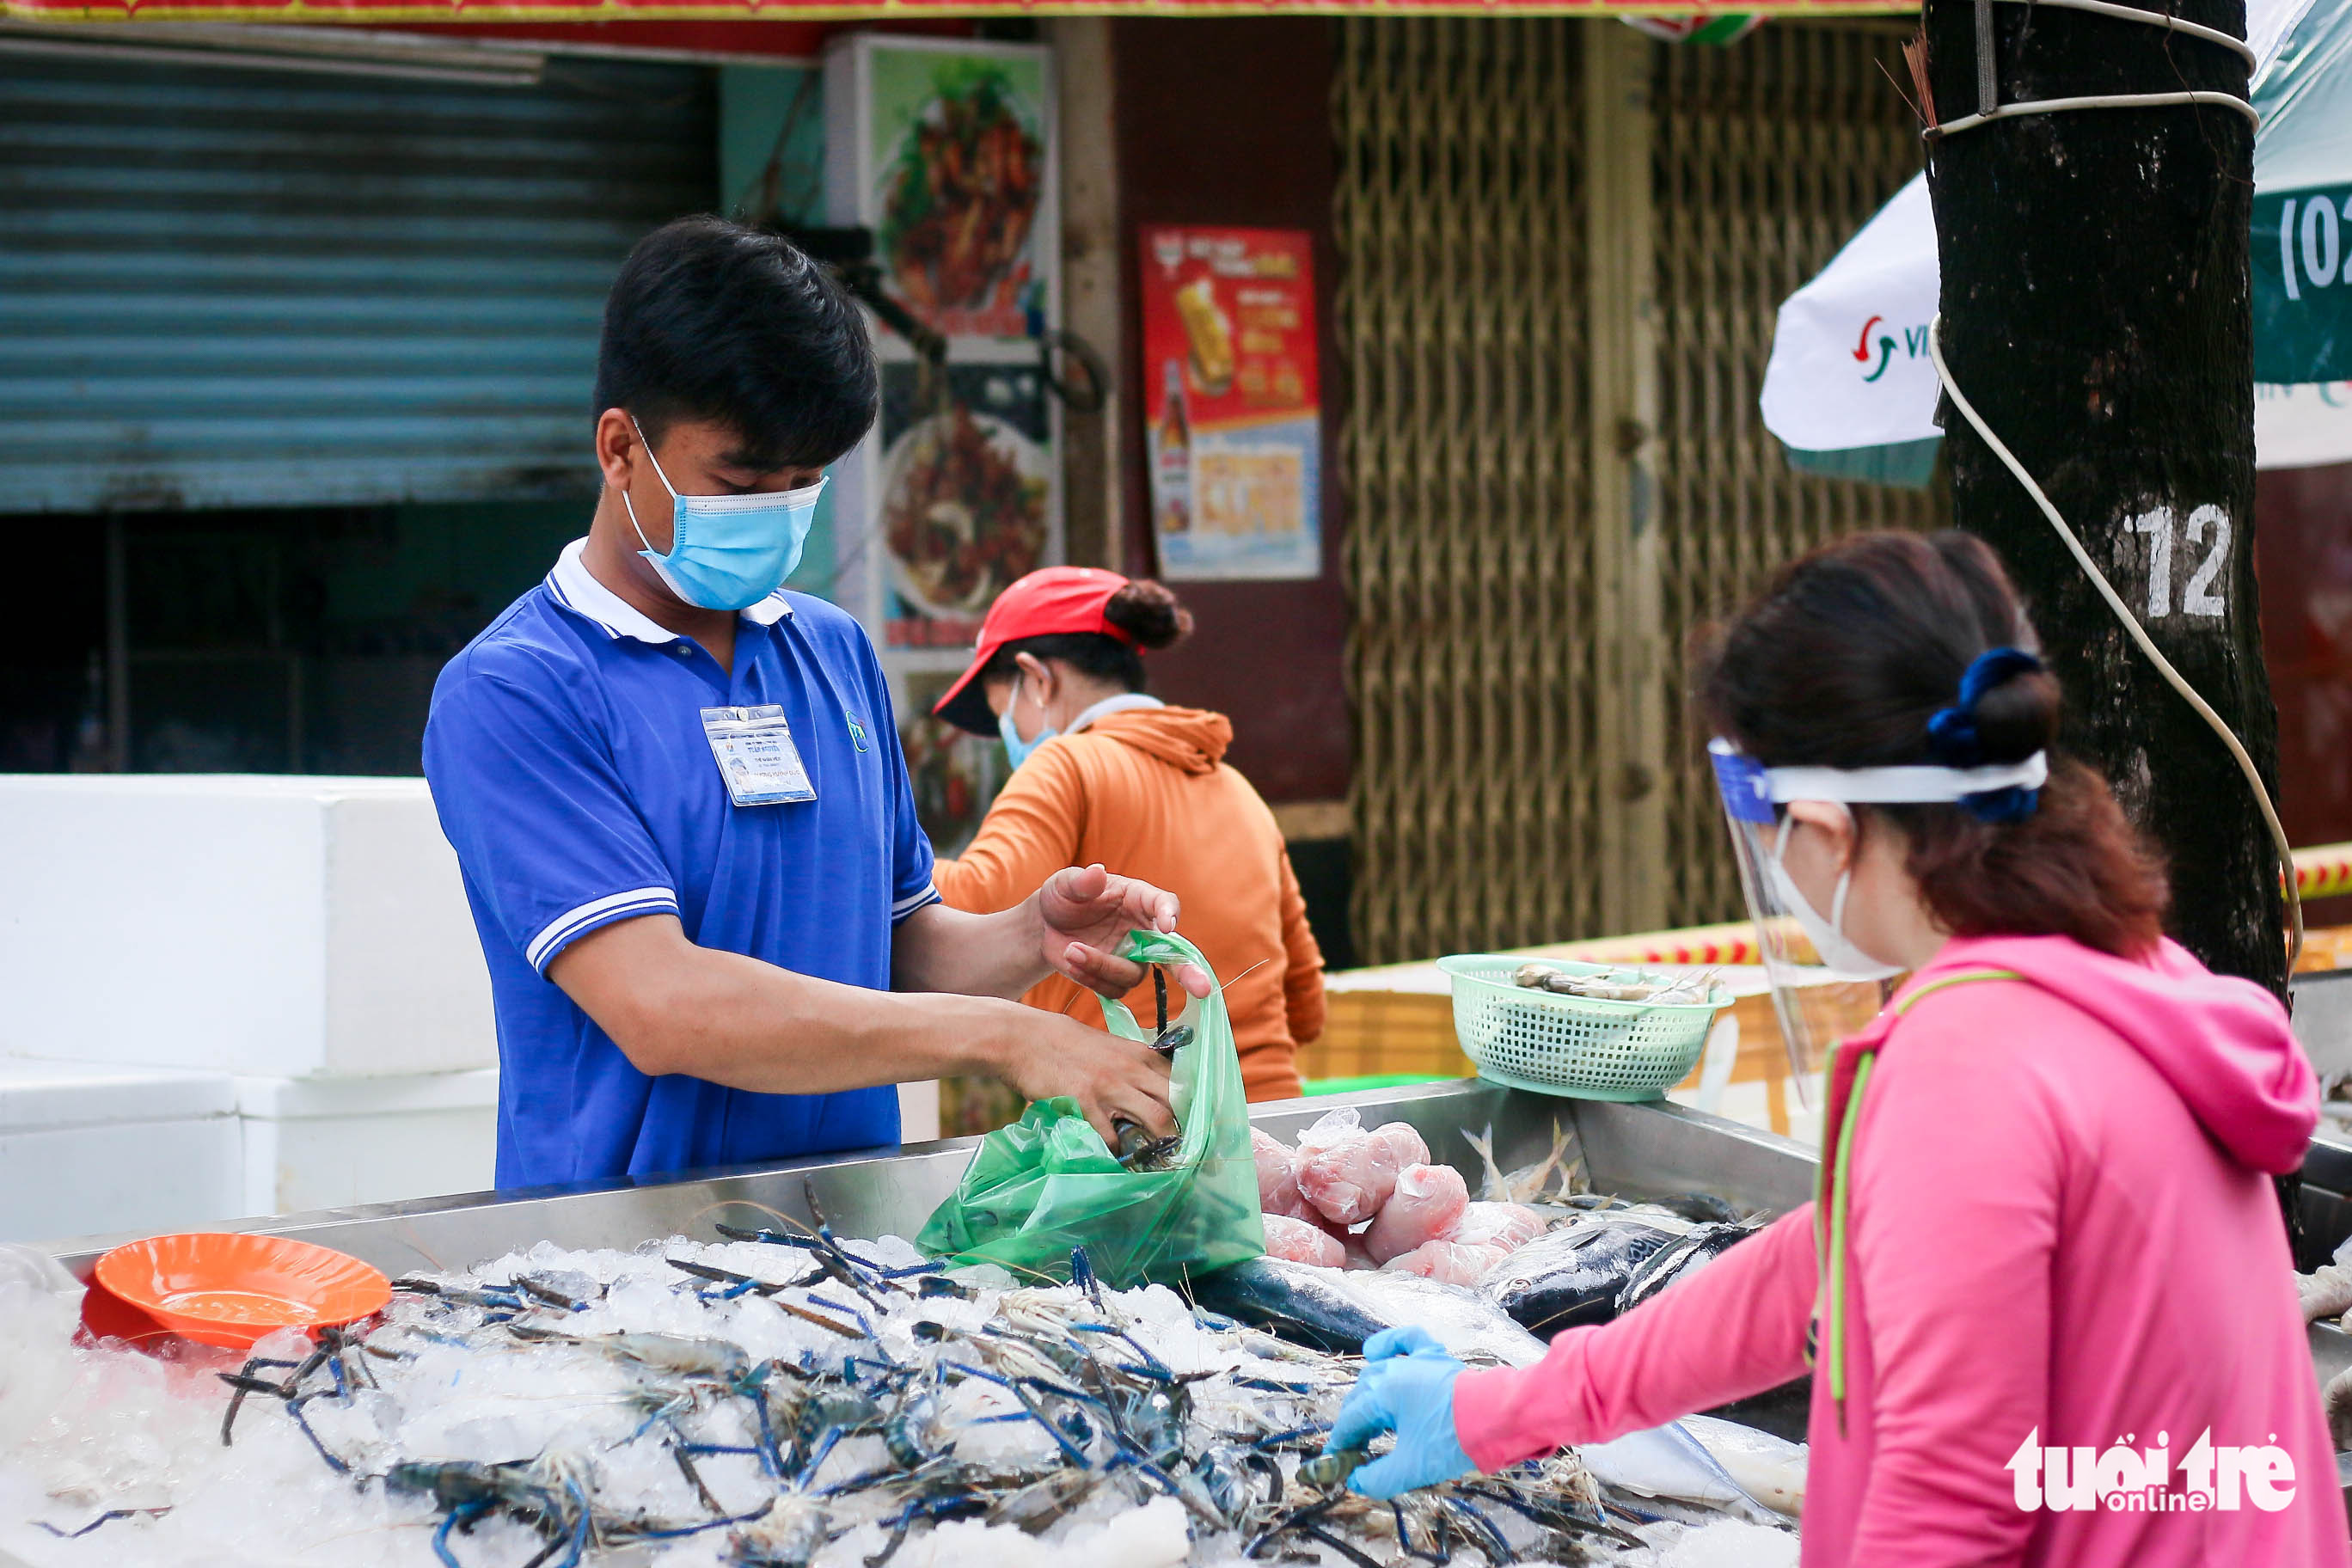 Seafood is sold at a makeshift market on Tan Da Street in District 5, Ho Chi Minh City, September 26, 2021. Photo: Chau Tuan / Tuoi Tre